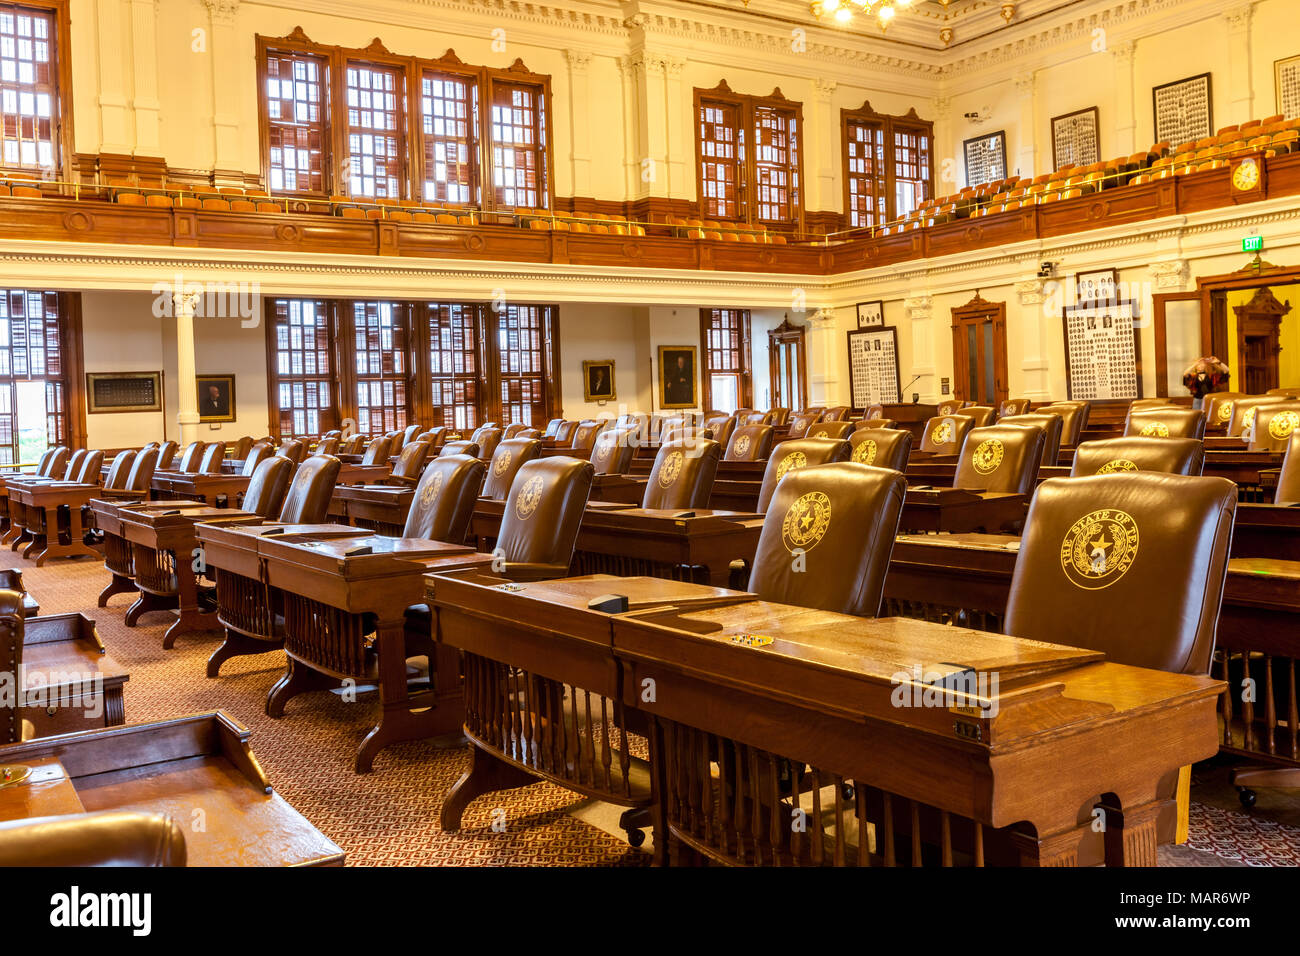 AUSTIN, TEXAS - MARCH 28, 2018 - The House of Representatives Chamber  of the Texas State Capitol building located in downtown Austin Stock Photo